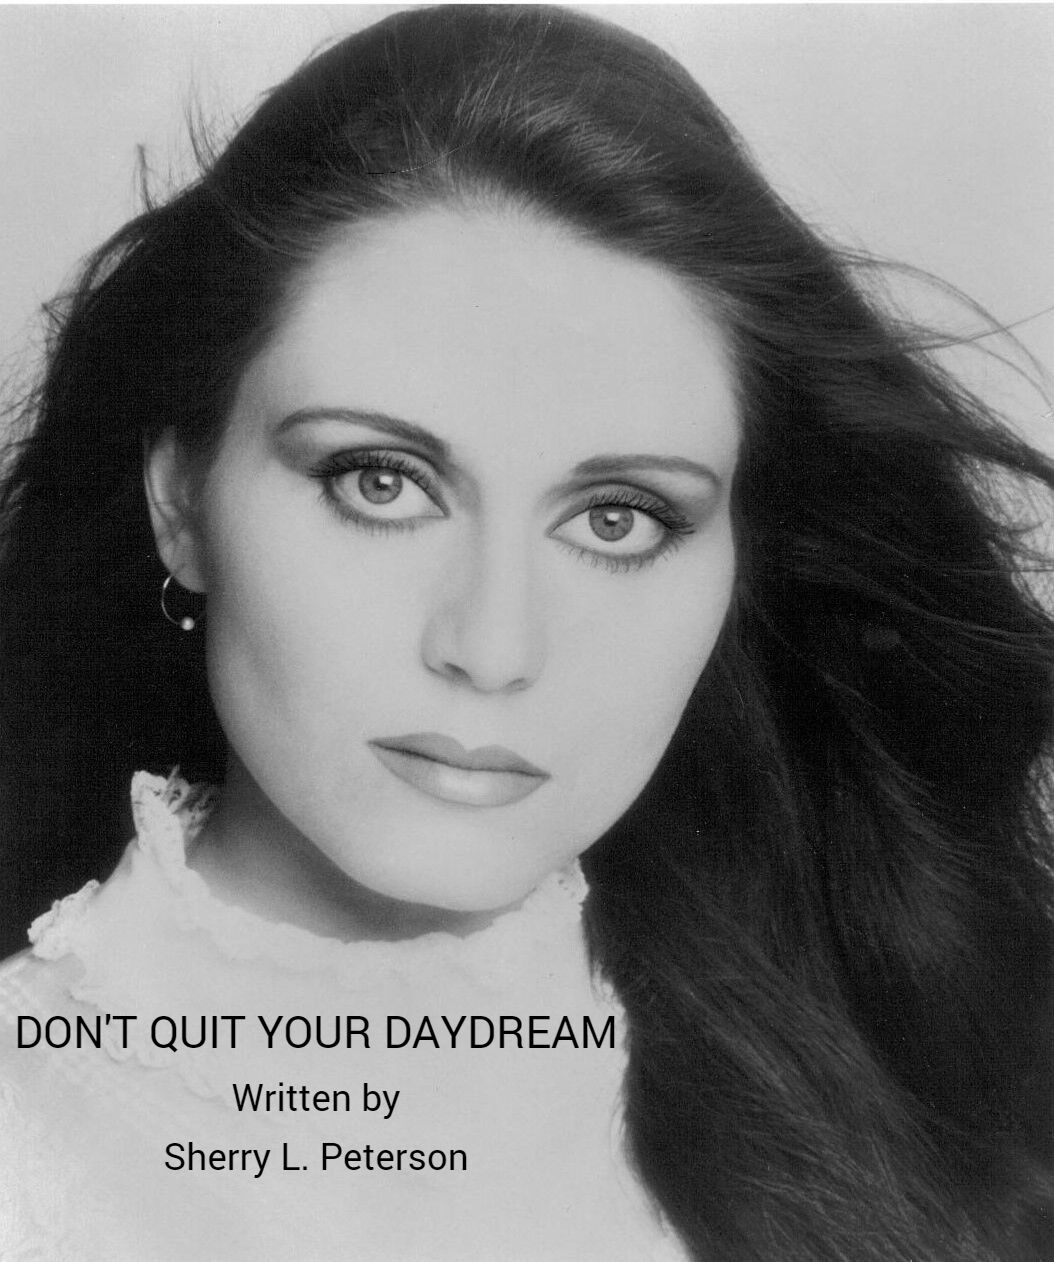 DON'T QUIT YOUR DAYDREAM